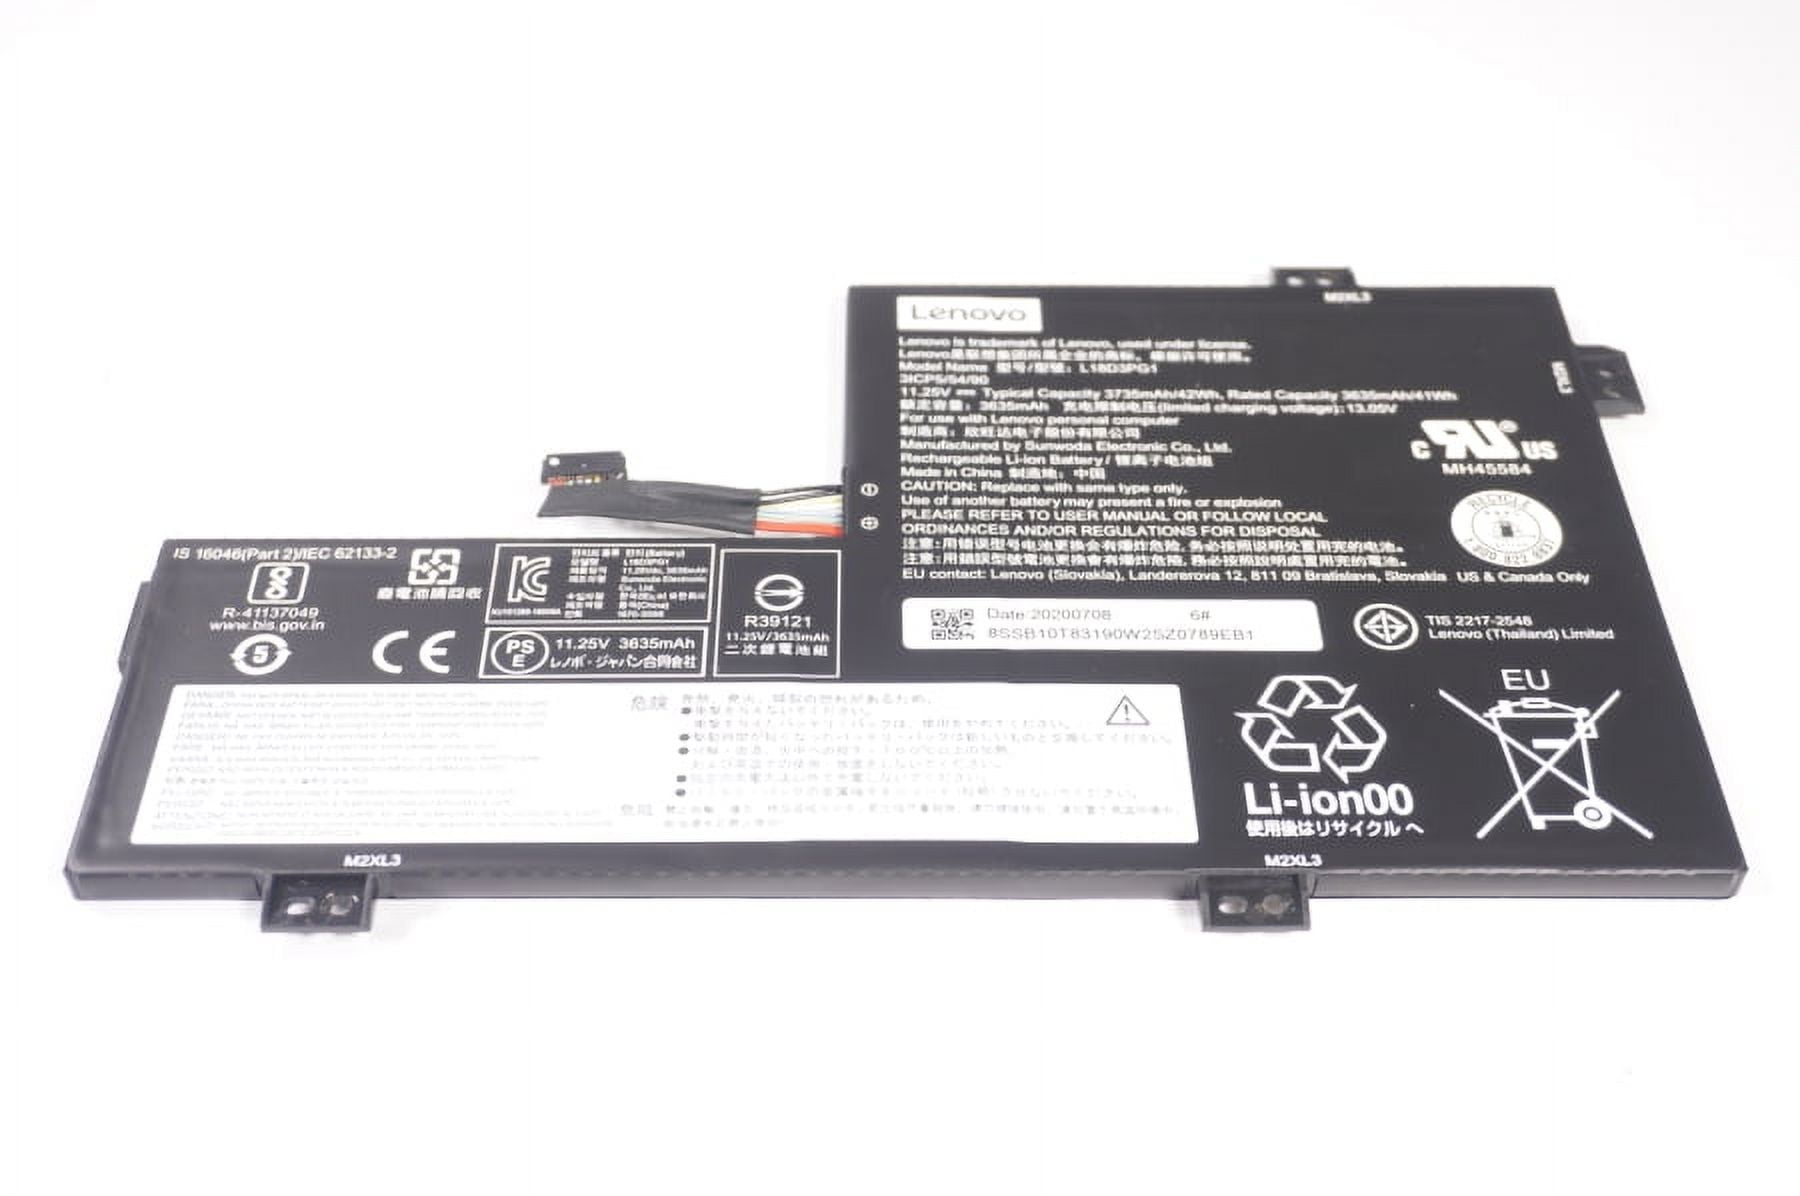 Long Lasting Wholesale asus x550 battery To Power Your Digital Devices 